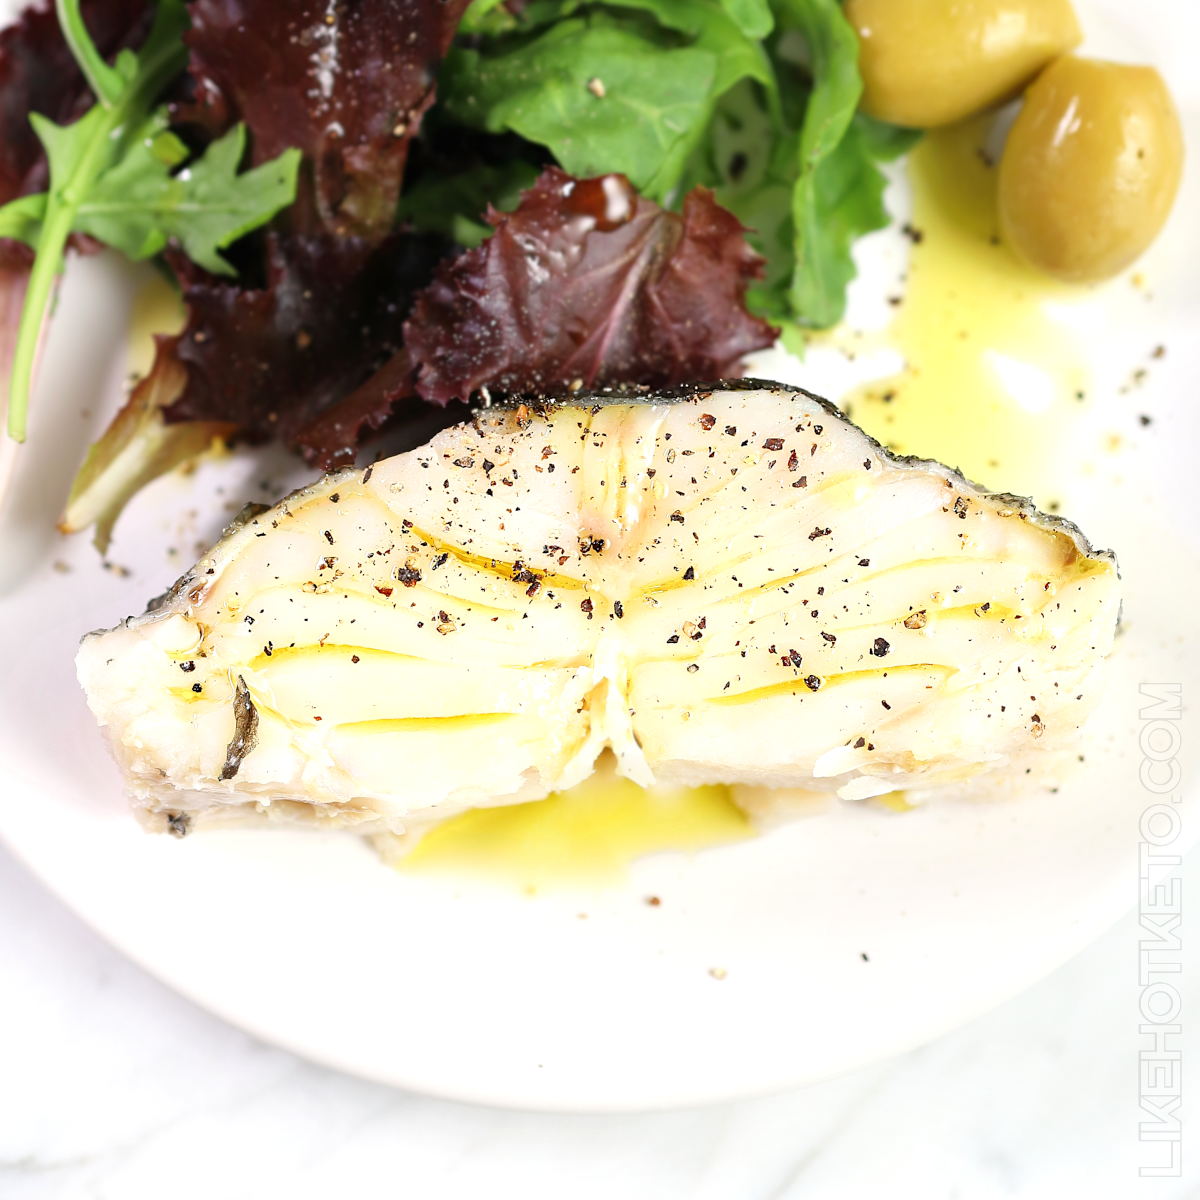 Poached cod fillet drizzled with olive oil on a white plate.